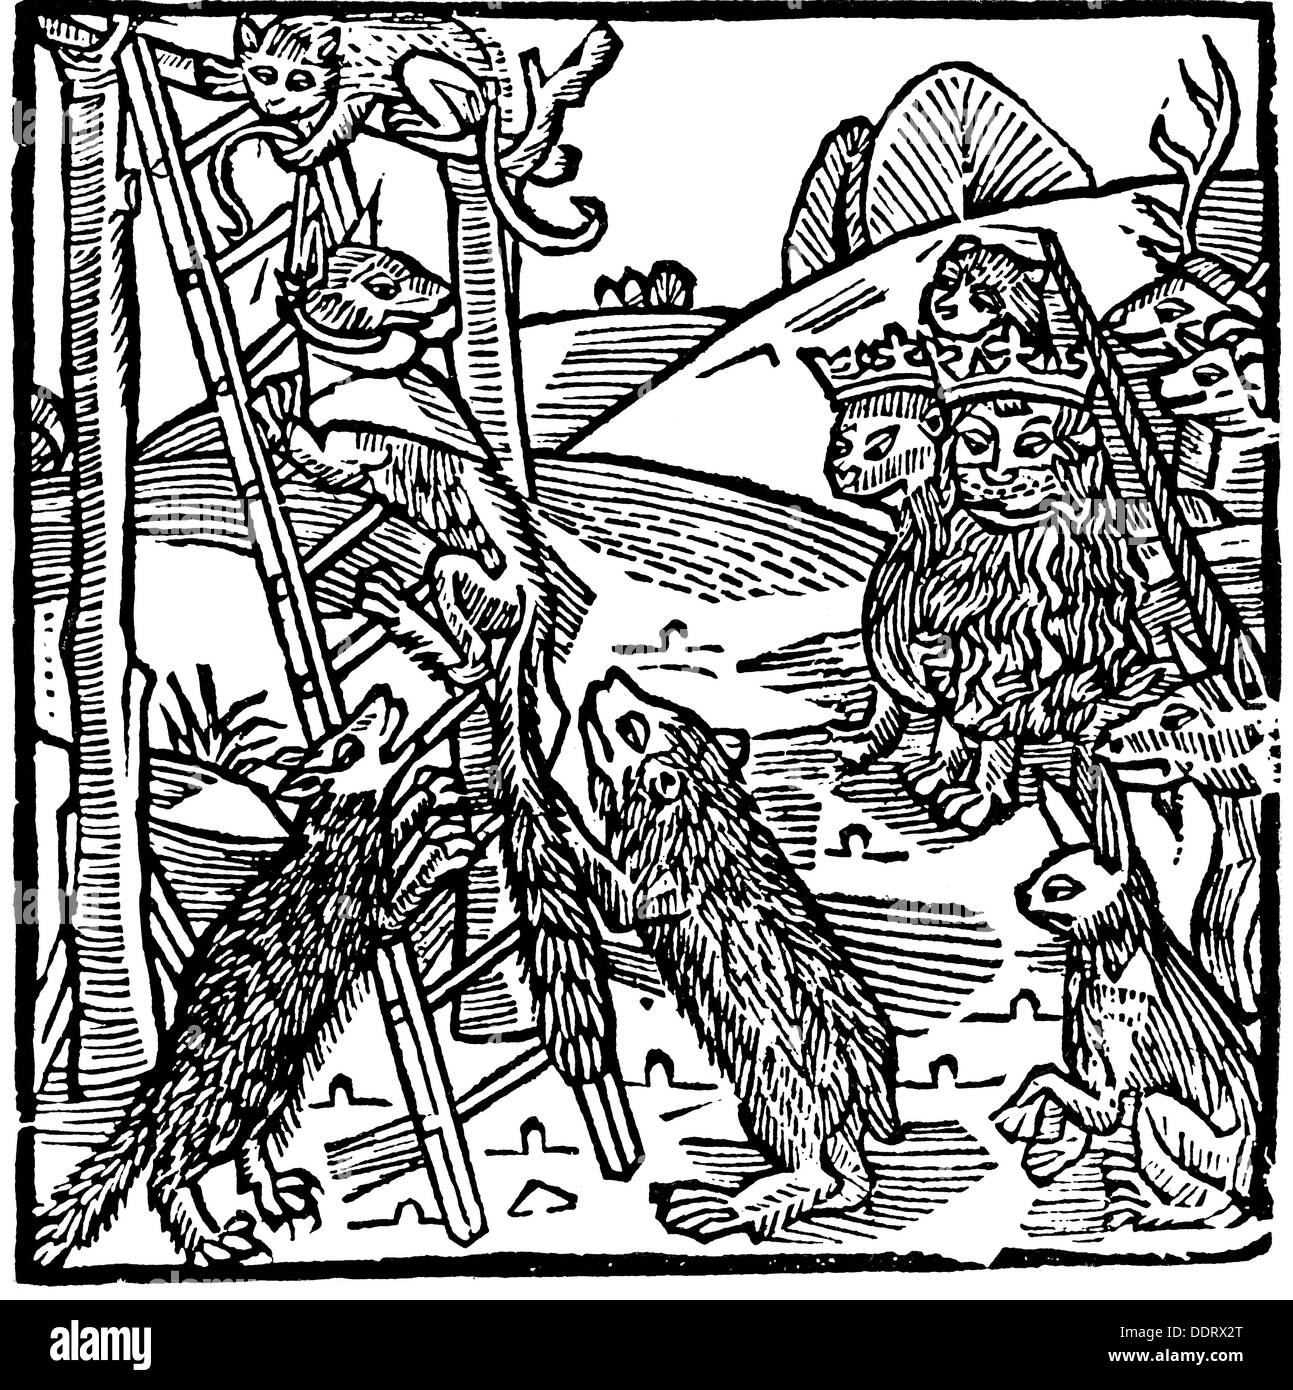 literature, Middle Ages, 'Reynke de Vos' (Reynke the Fox), fox shall be hanged on the gallow, woodcut, incunabula, print: Hans van Ghetelen (before 1480 - before 31.1.1528), Lübeck, Germany, 1498, Additional-Rights-Clearences-Not Available Stock Photo